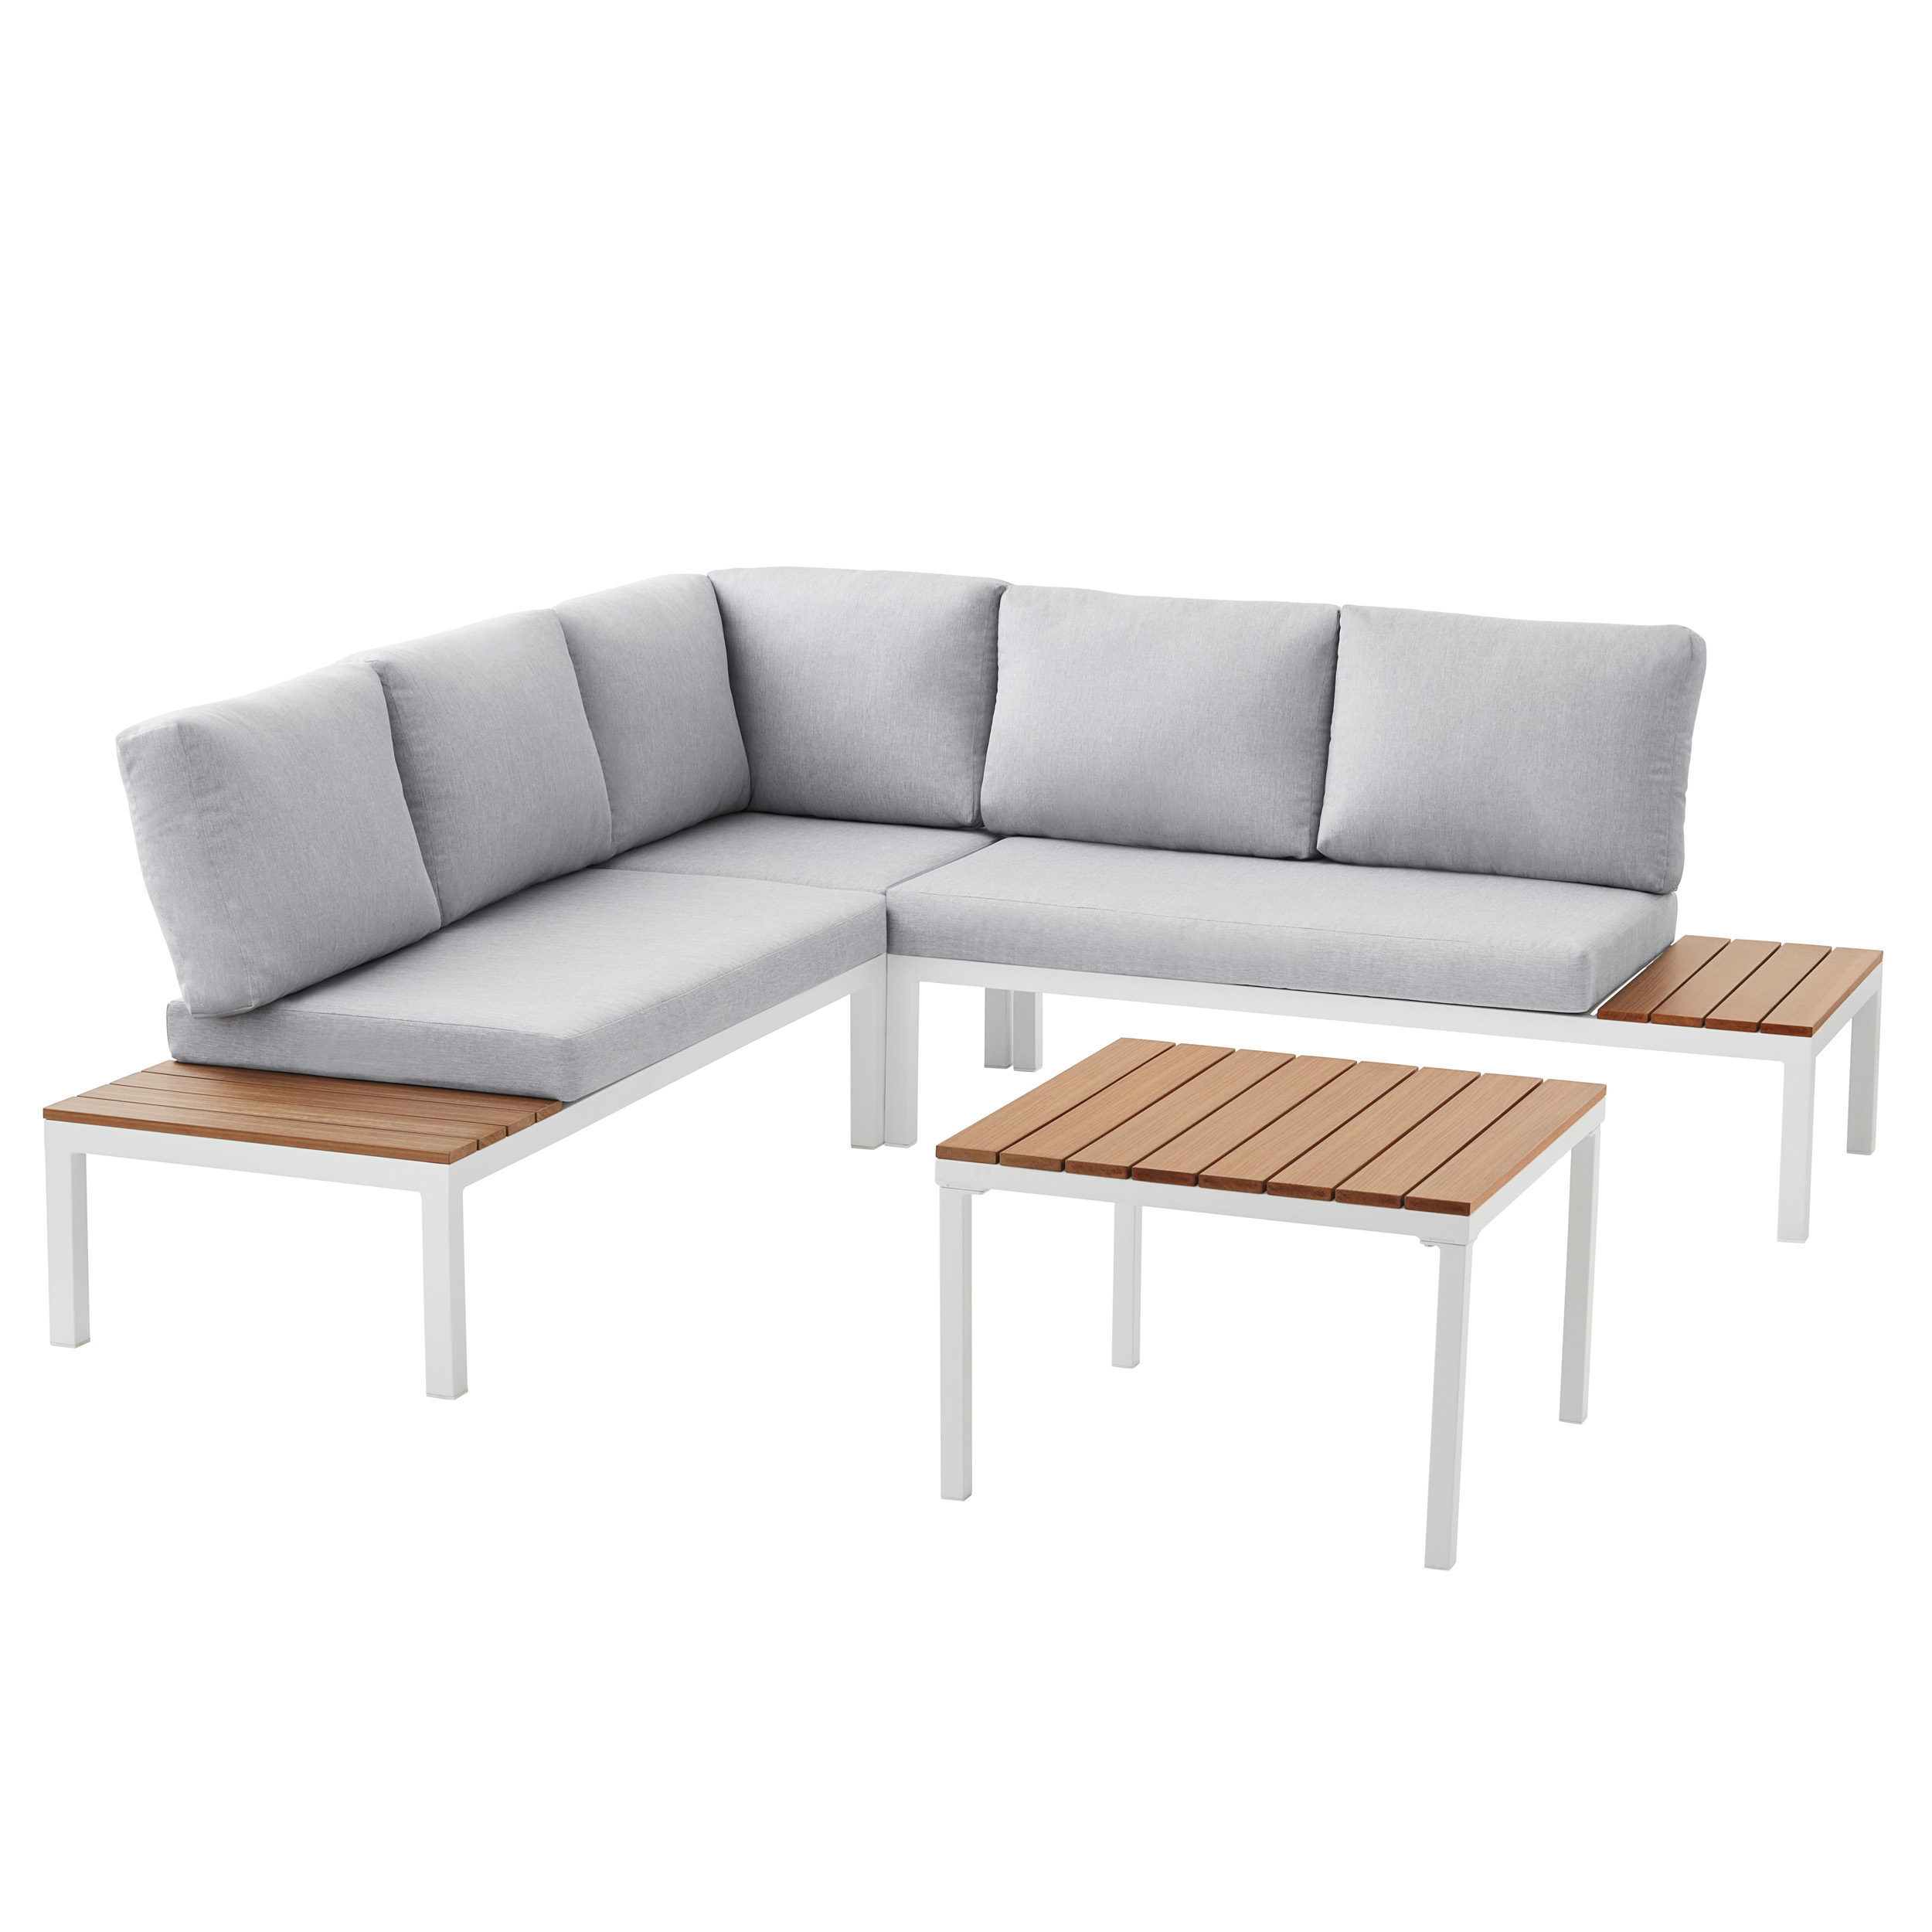 Mainstays Oakleigh 4-Piece Outdoor Chaise Sectional Set with Table, Seats 5, White - image 5 of 10